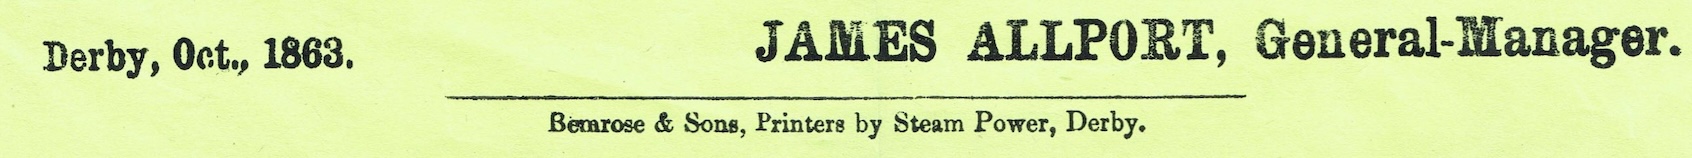 BeMrose and Sons -- Printers by Steam Power, Derby 